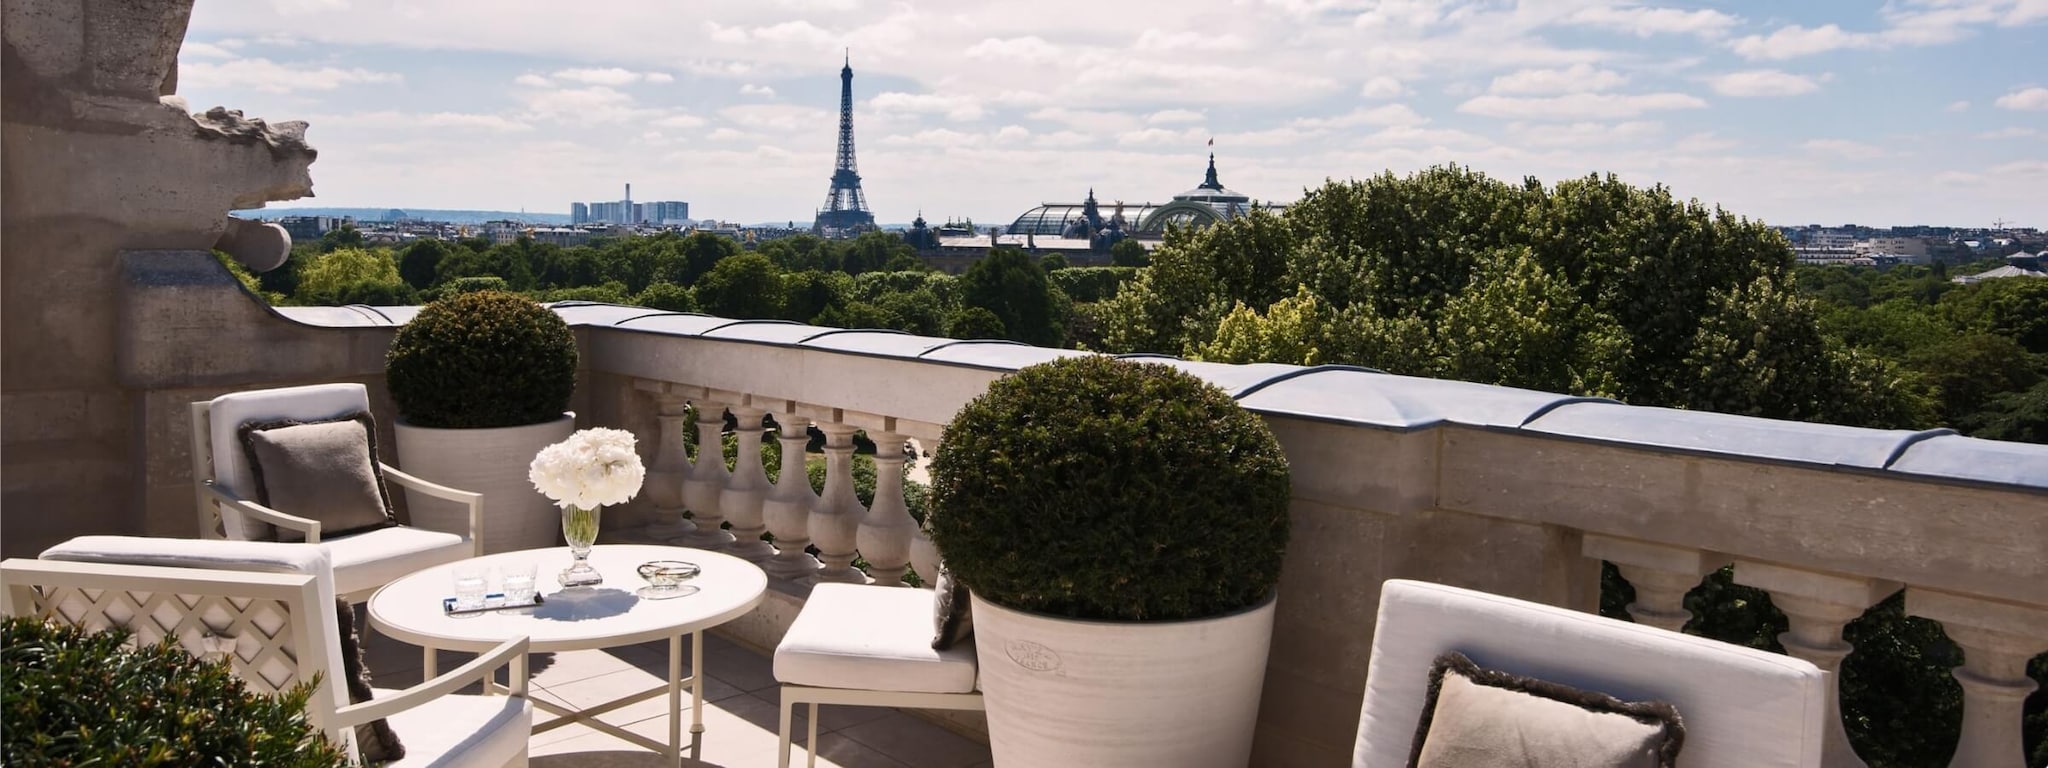 T&C Travel Guide: Paris in the Summer